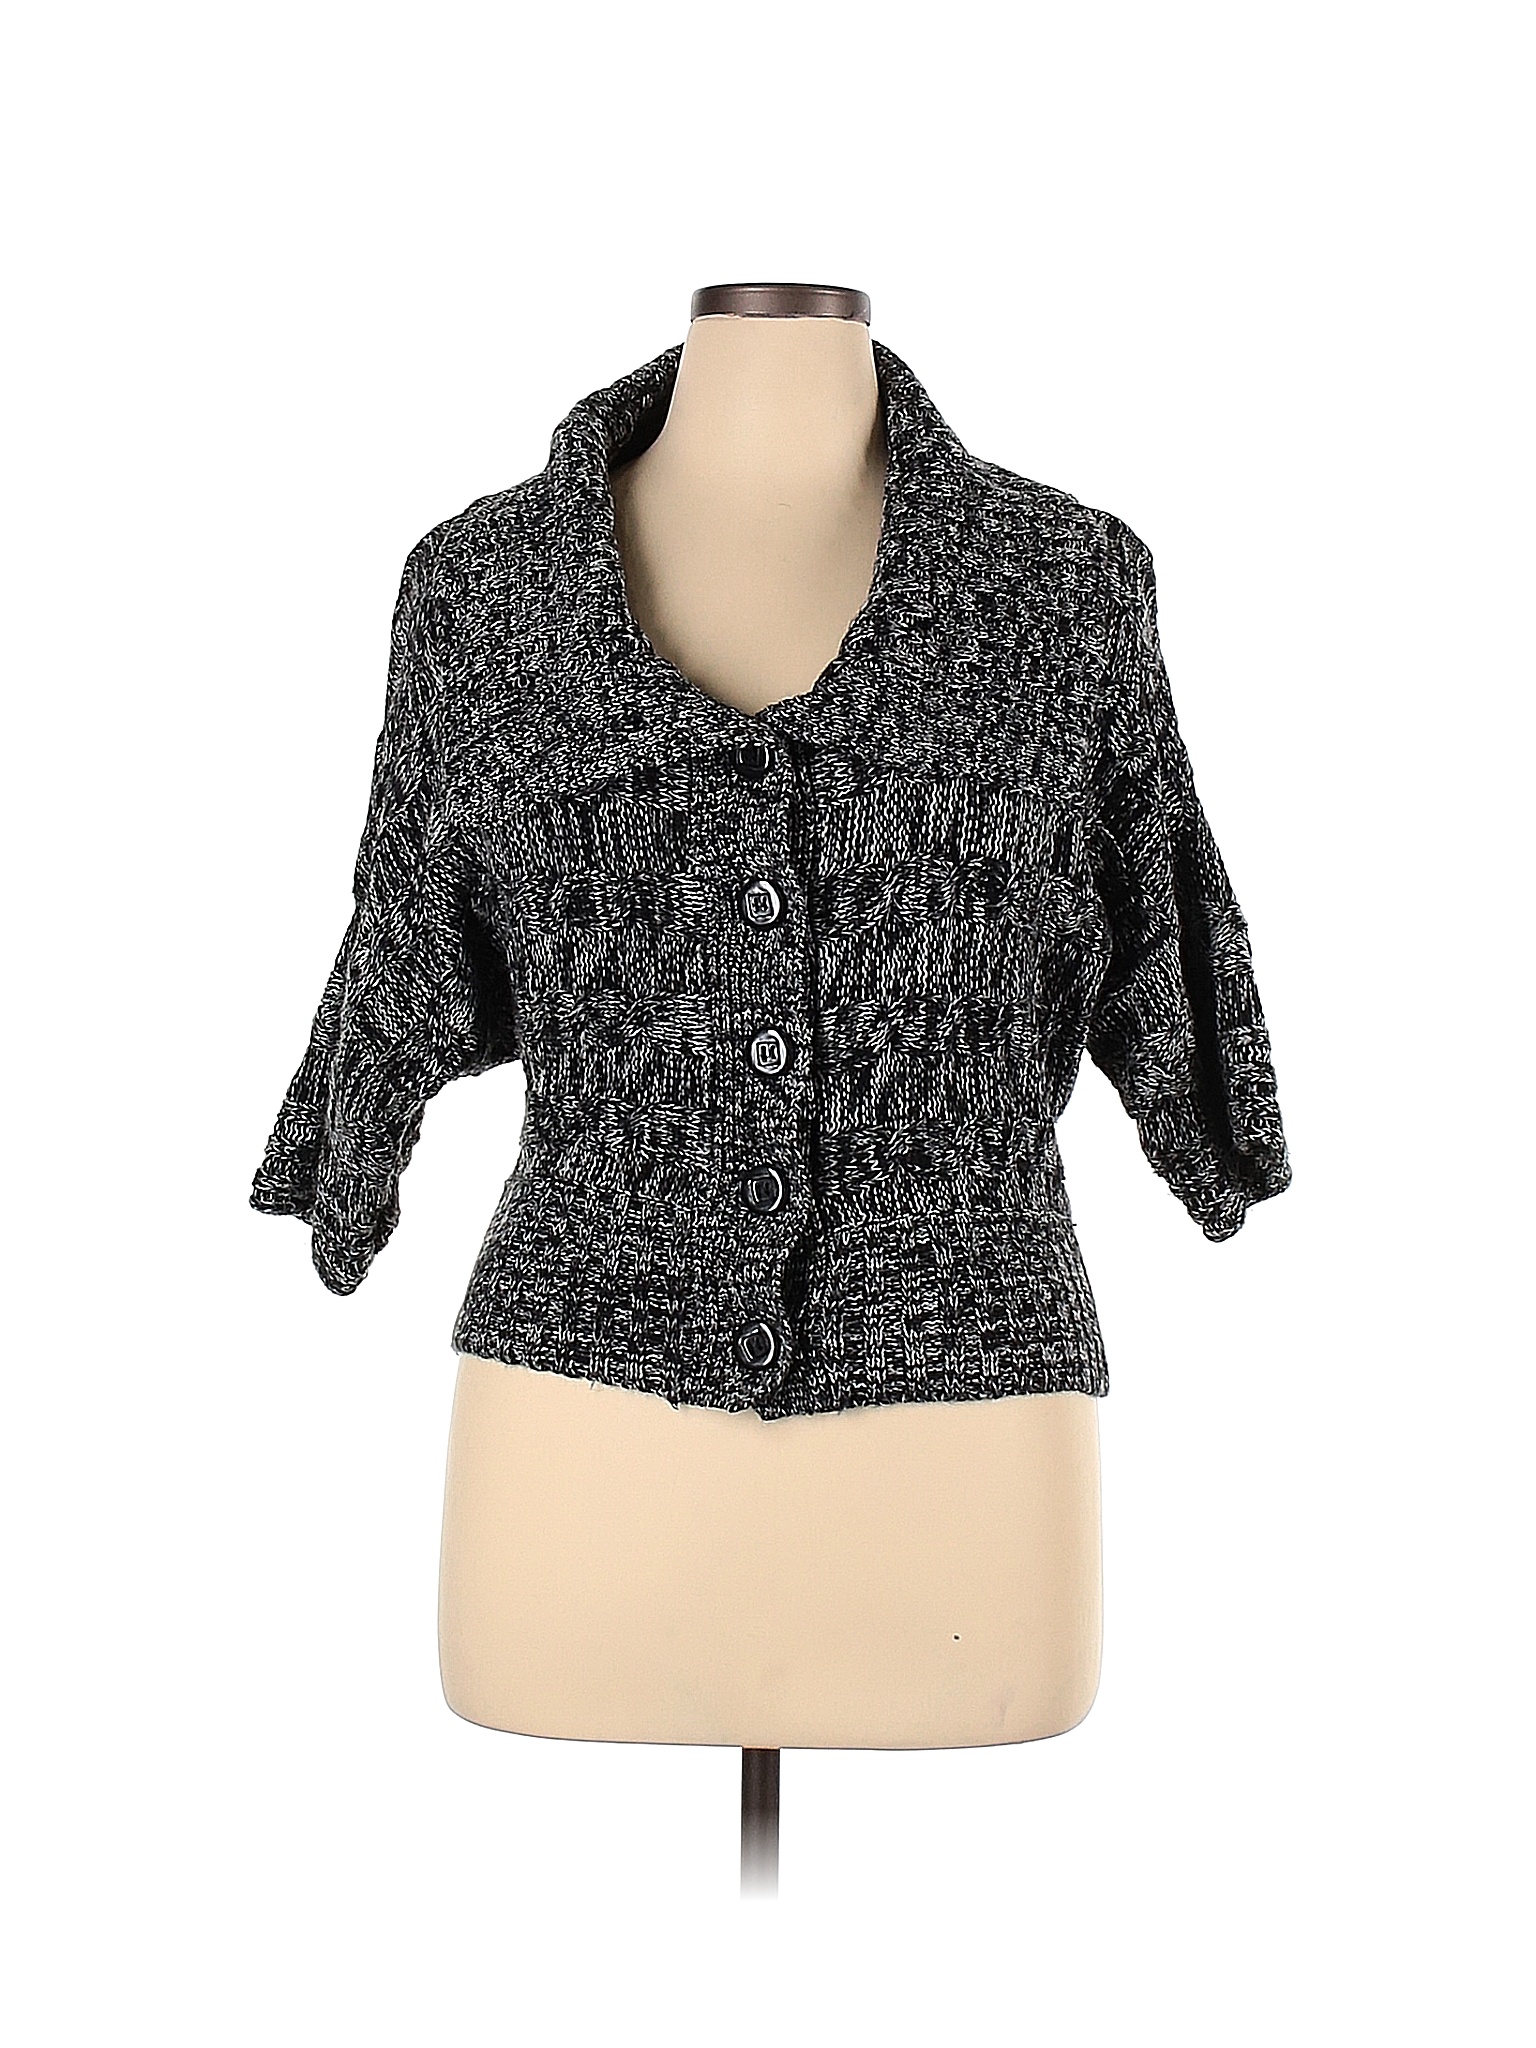 Say What? 100% Acrylic Color Block Marled Black Cardigan Size XL - 78% ...